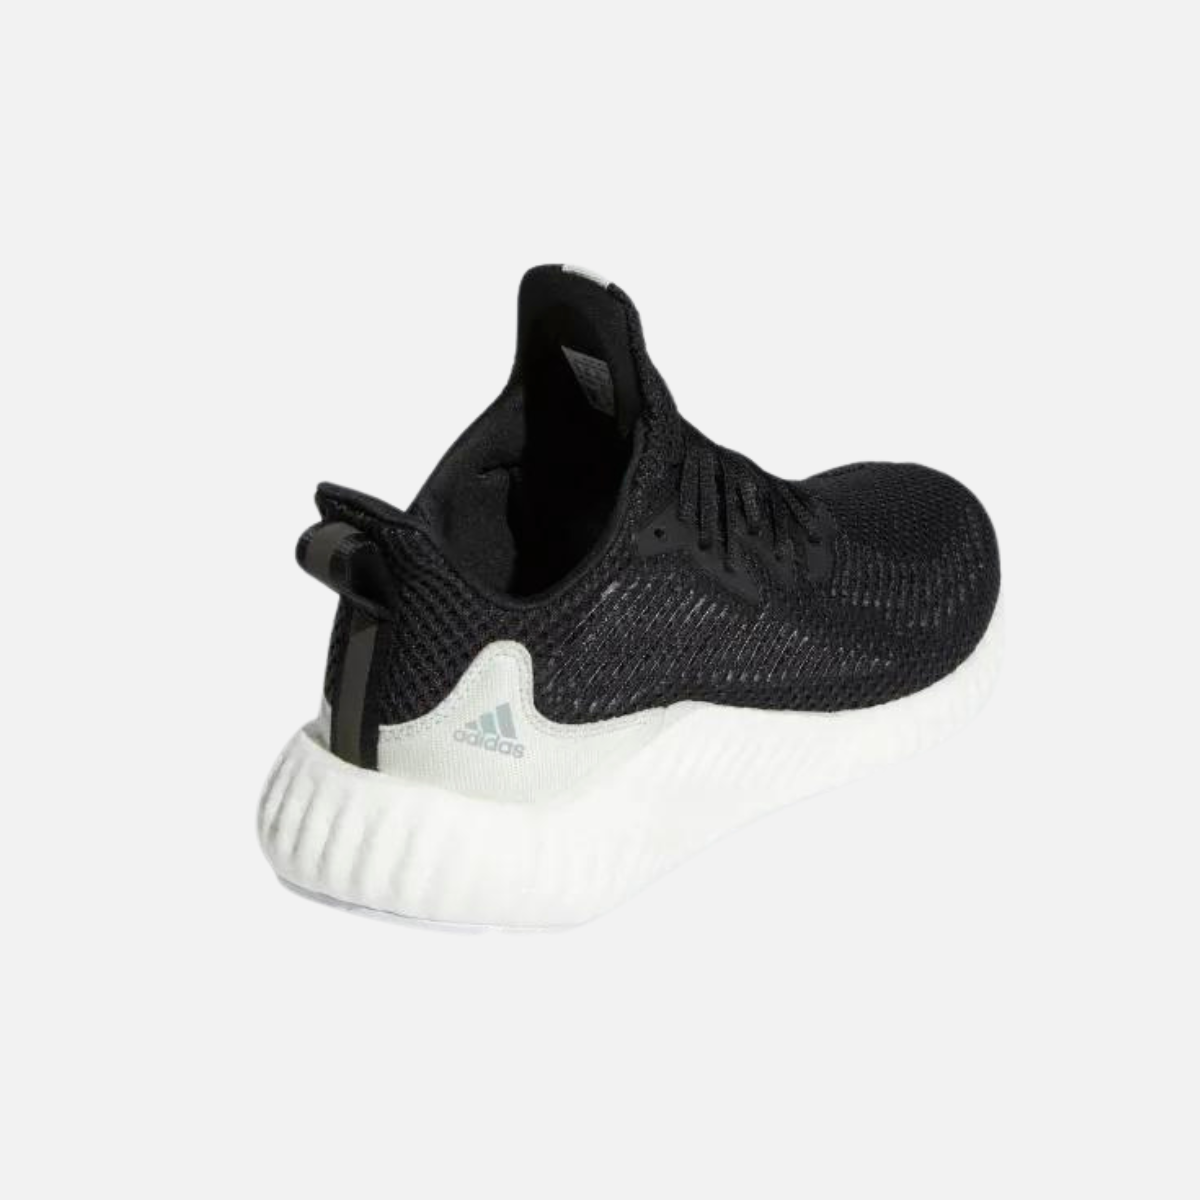 Adidas Alphaboost Parley Shoes -Core Black/Linen Green/Cloud White